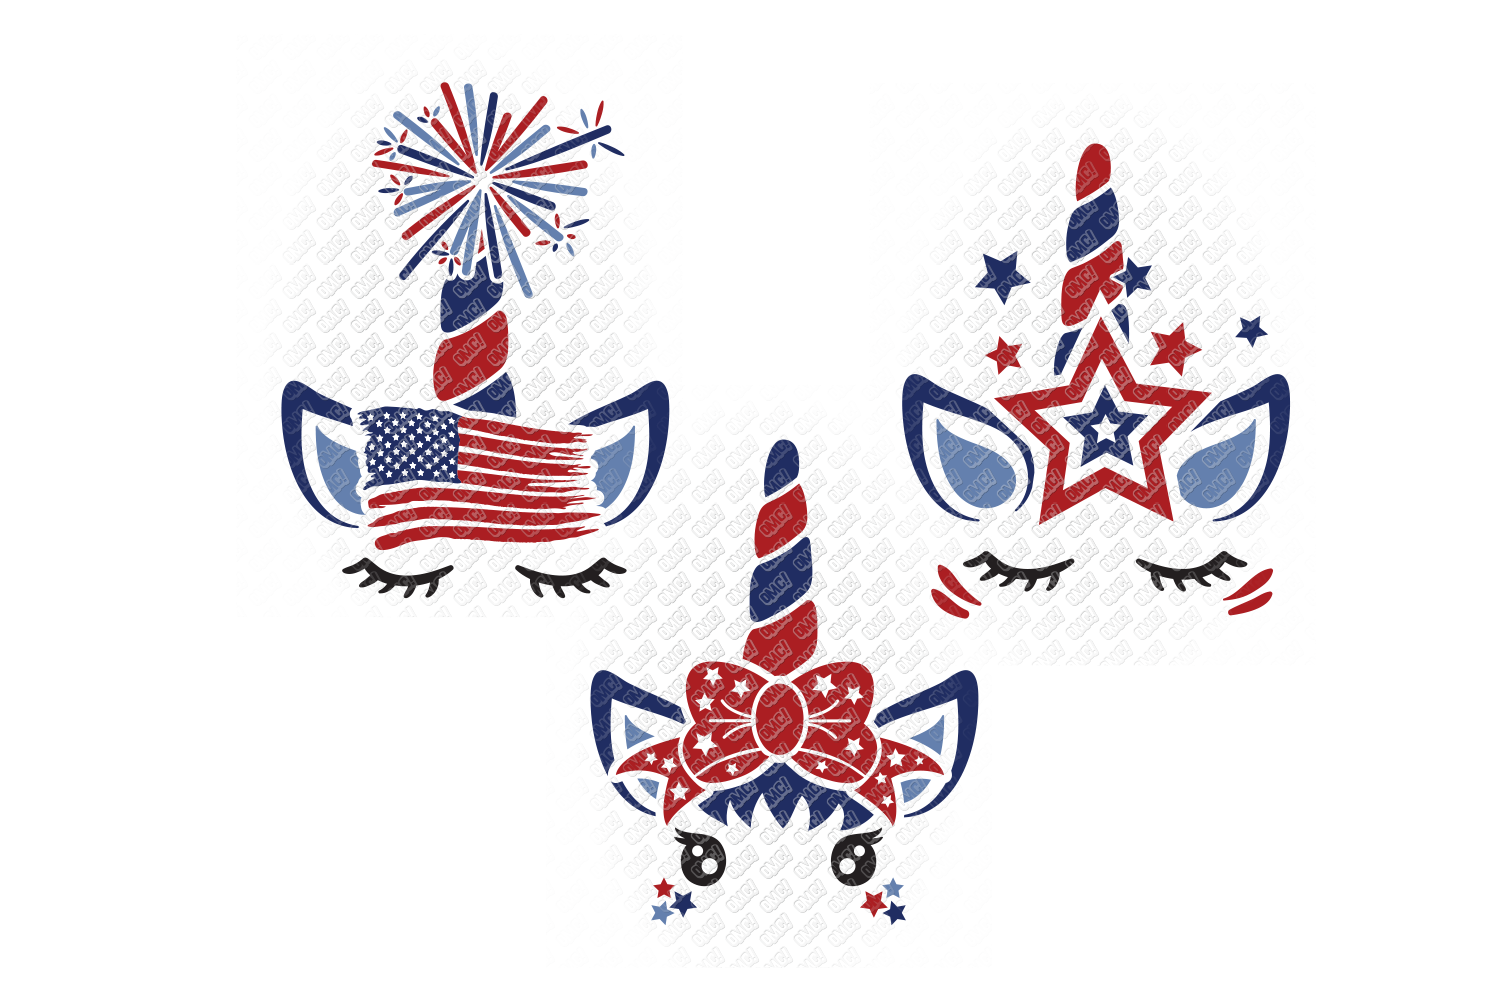 Download 4th of July Unicorn SVG in SVG, DXF, PNG, EPS, JPEG